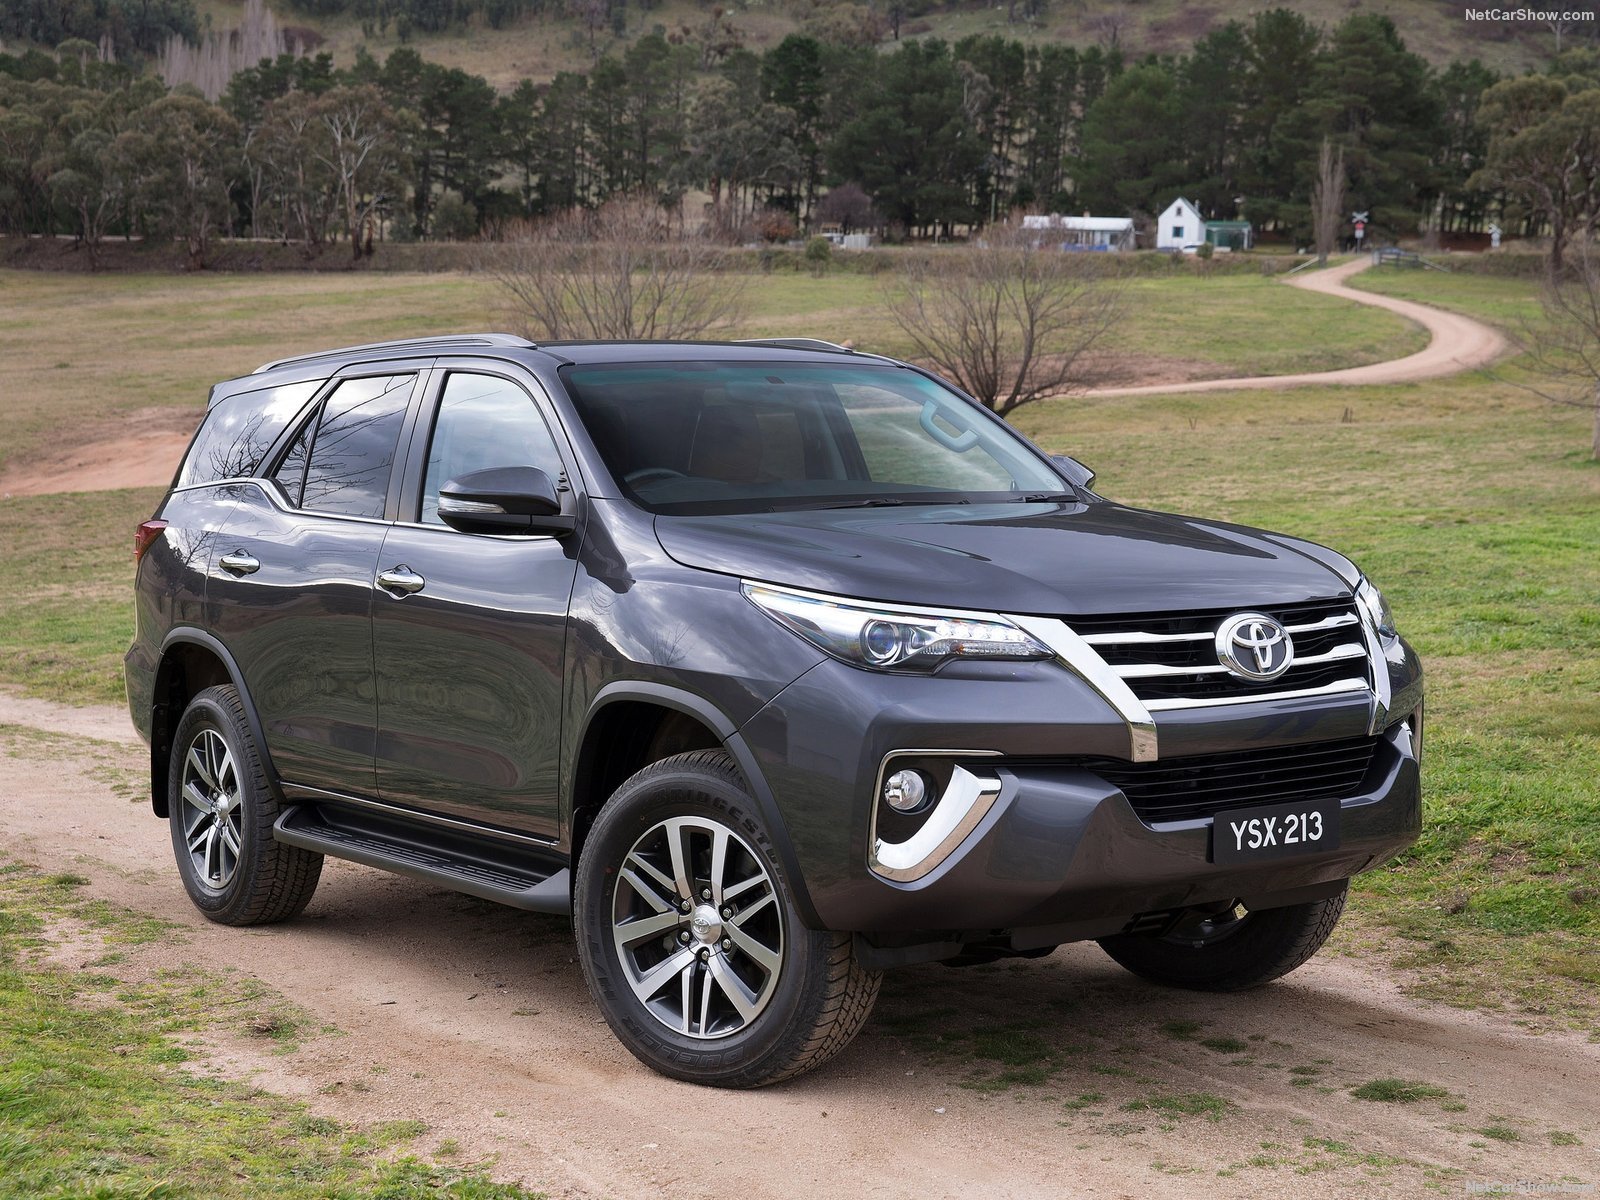 toyota, Fortuner, Cars, Suv, 4x4, 2016 Wallpaper